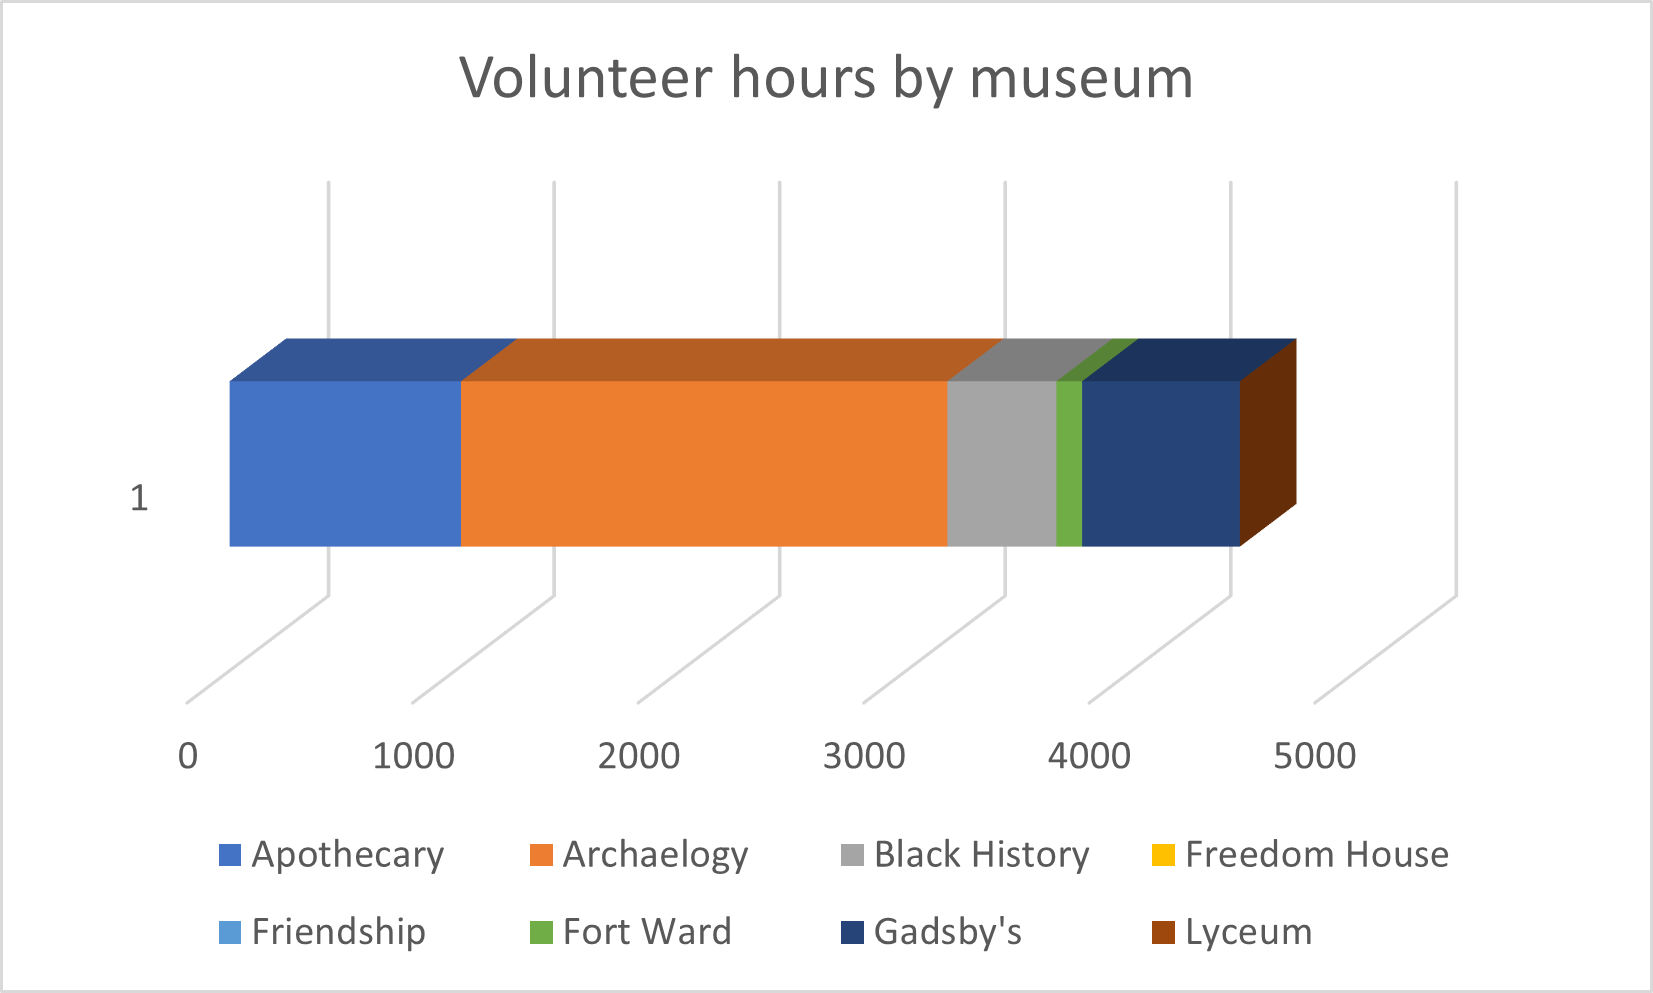 Bar graph showing total museum hours with colors reflecting the different museums